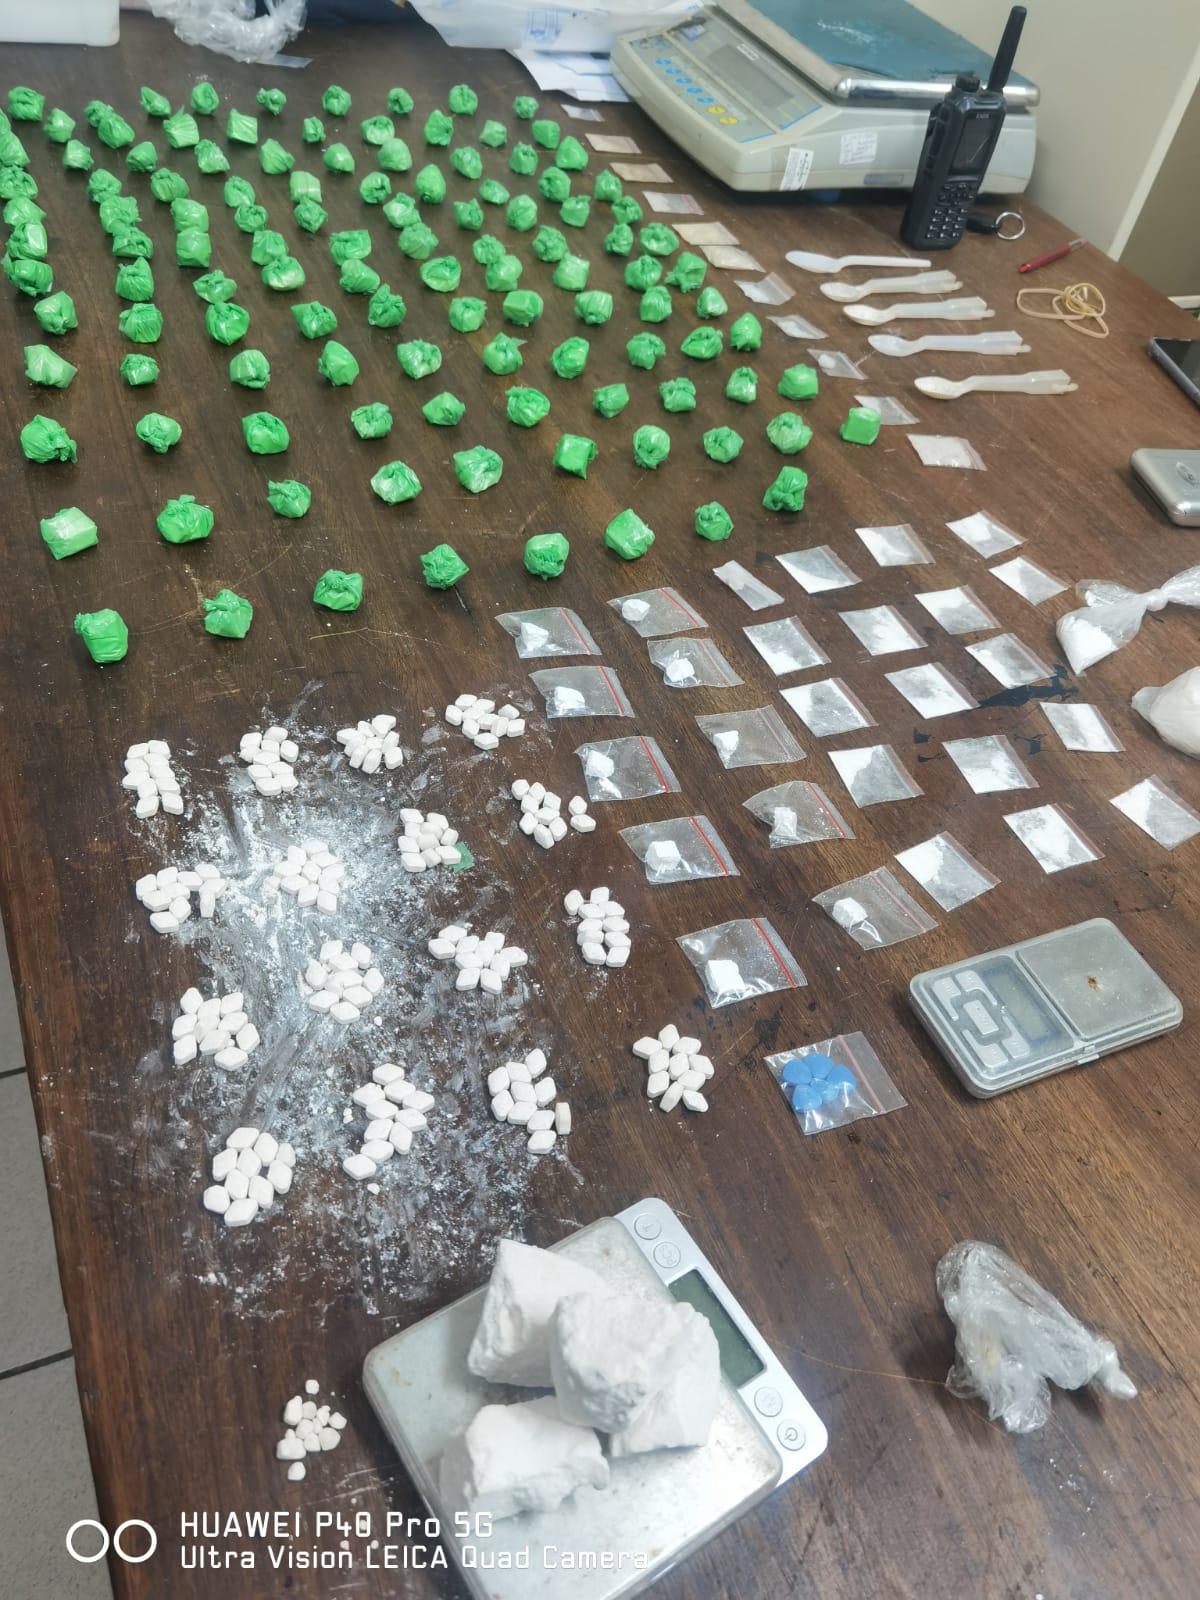 Geberha Flying Squad confiscate drugs